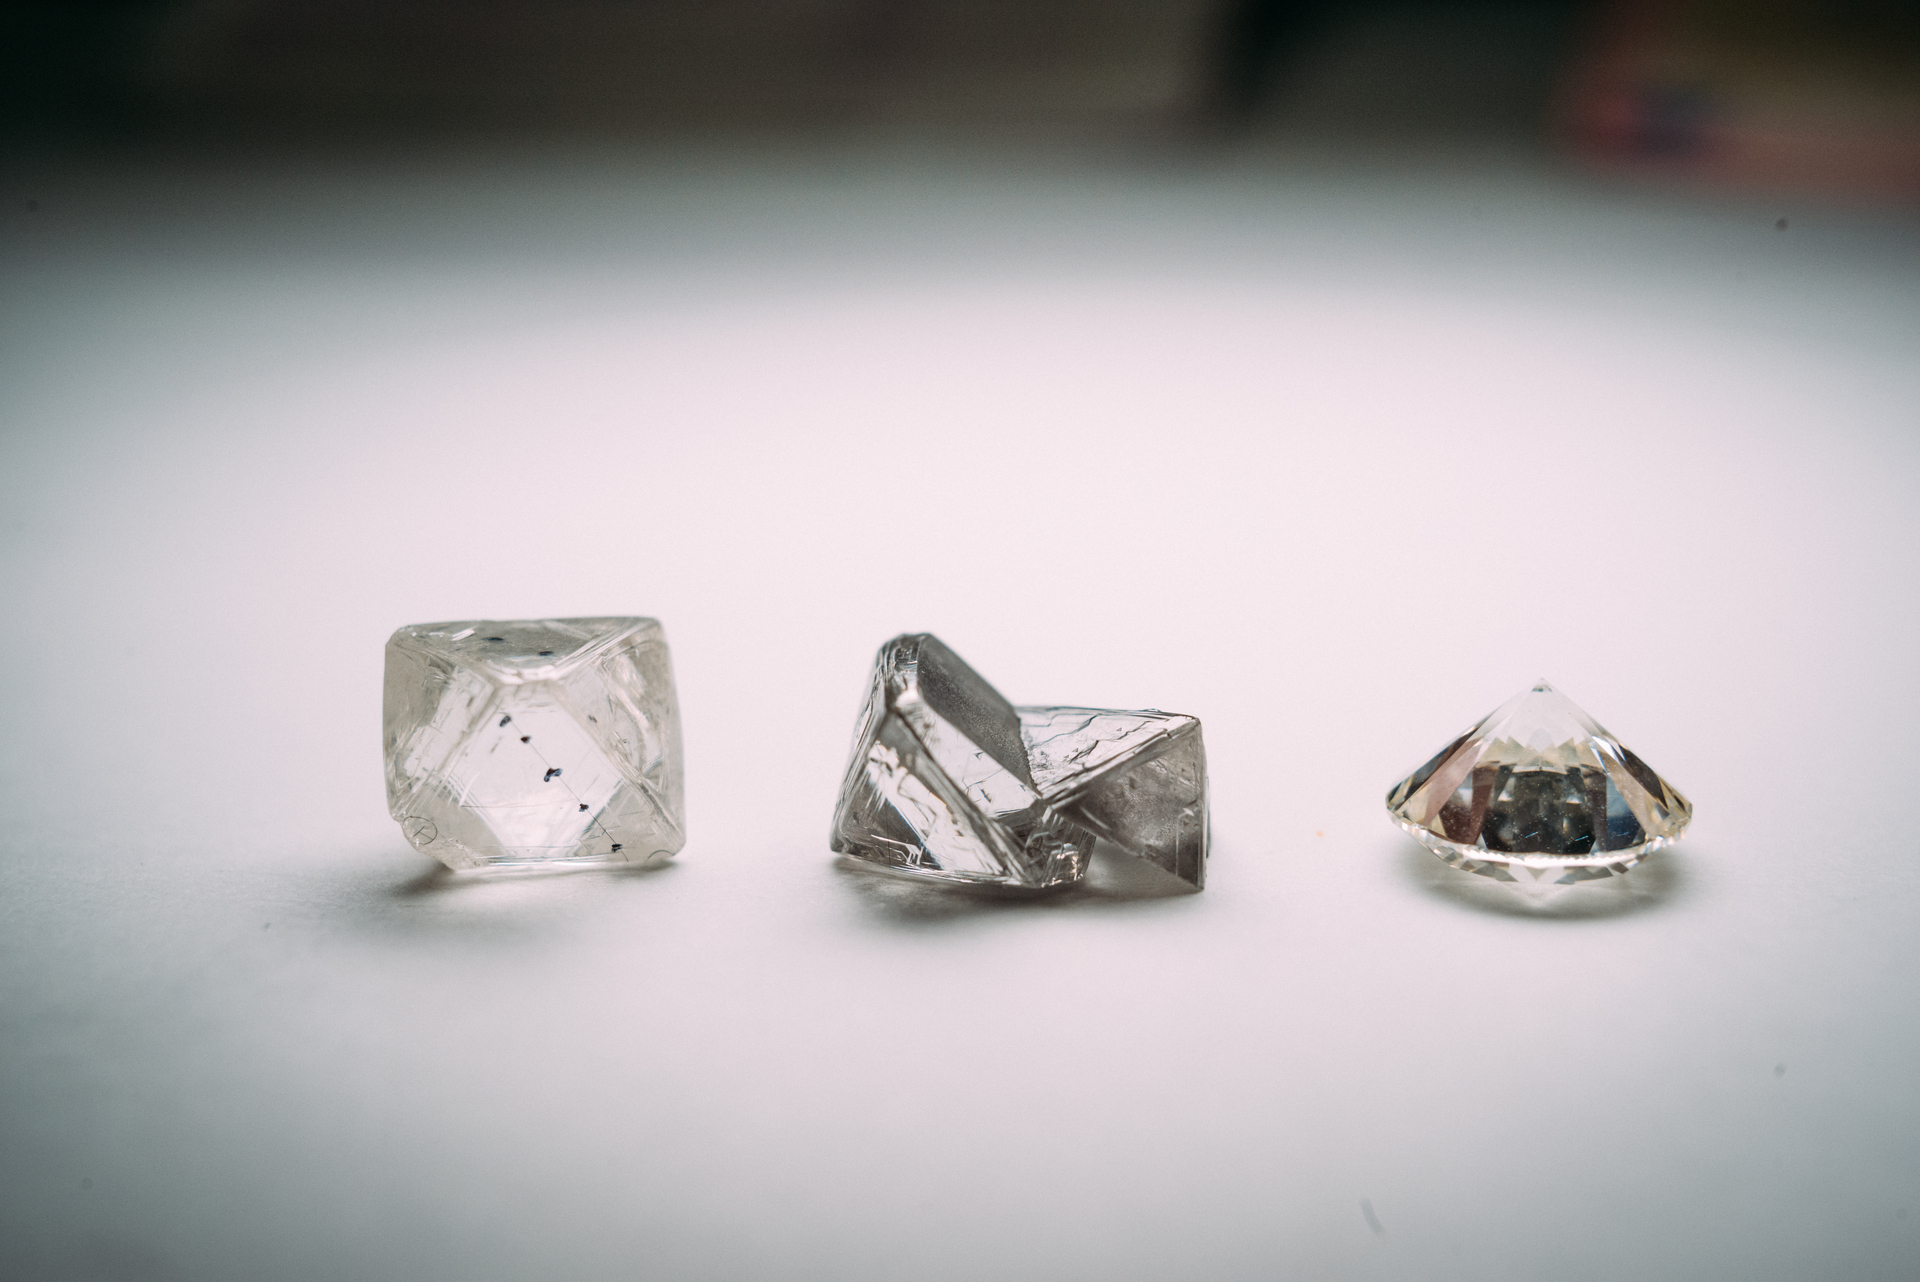 Making diamonds under pressure: Digging into De Beers' blueprint for sustainable mining